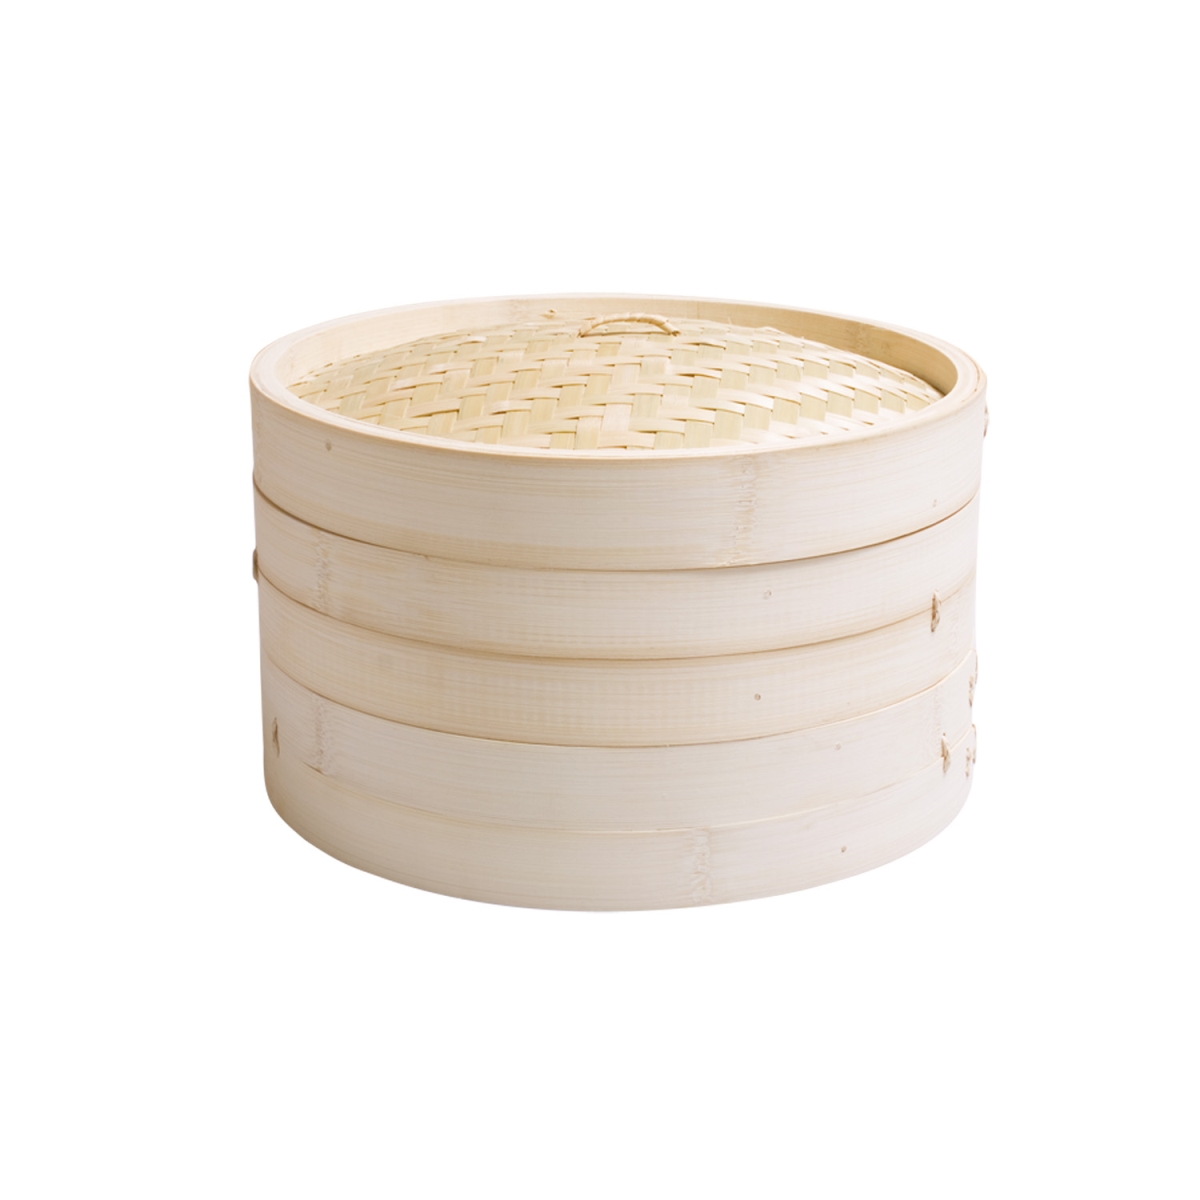 Picture of Helens Asian Kitchen 235096 10 in. Bamboo Steamer - 3 Piece